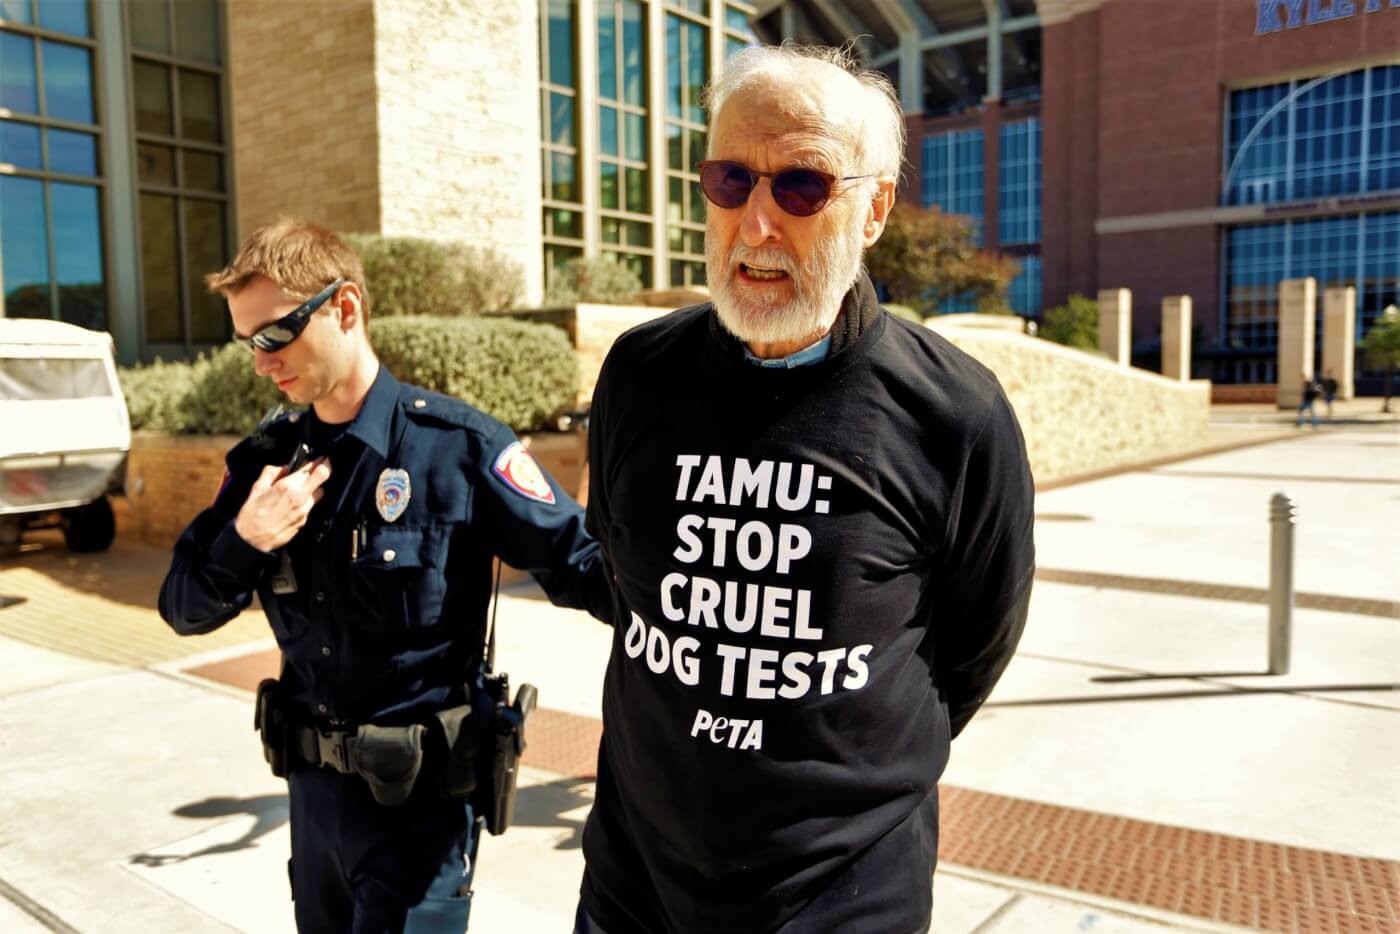 Texas A&M police arresting James Cromwell